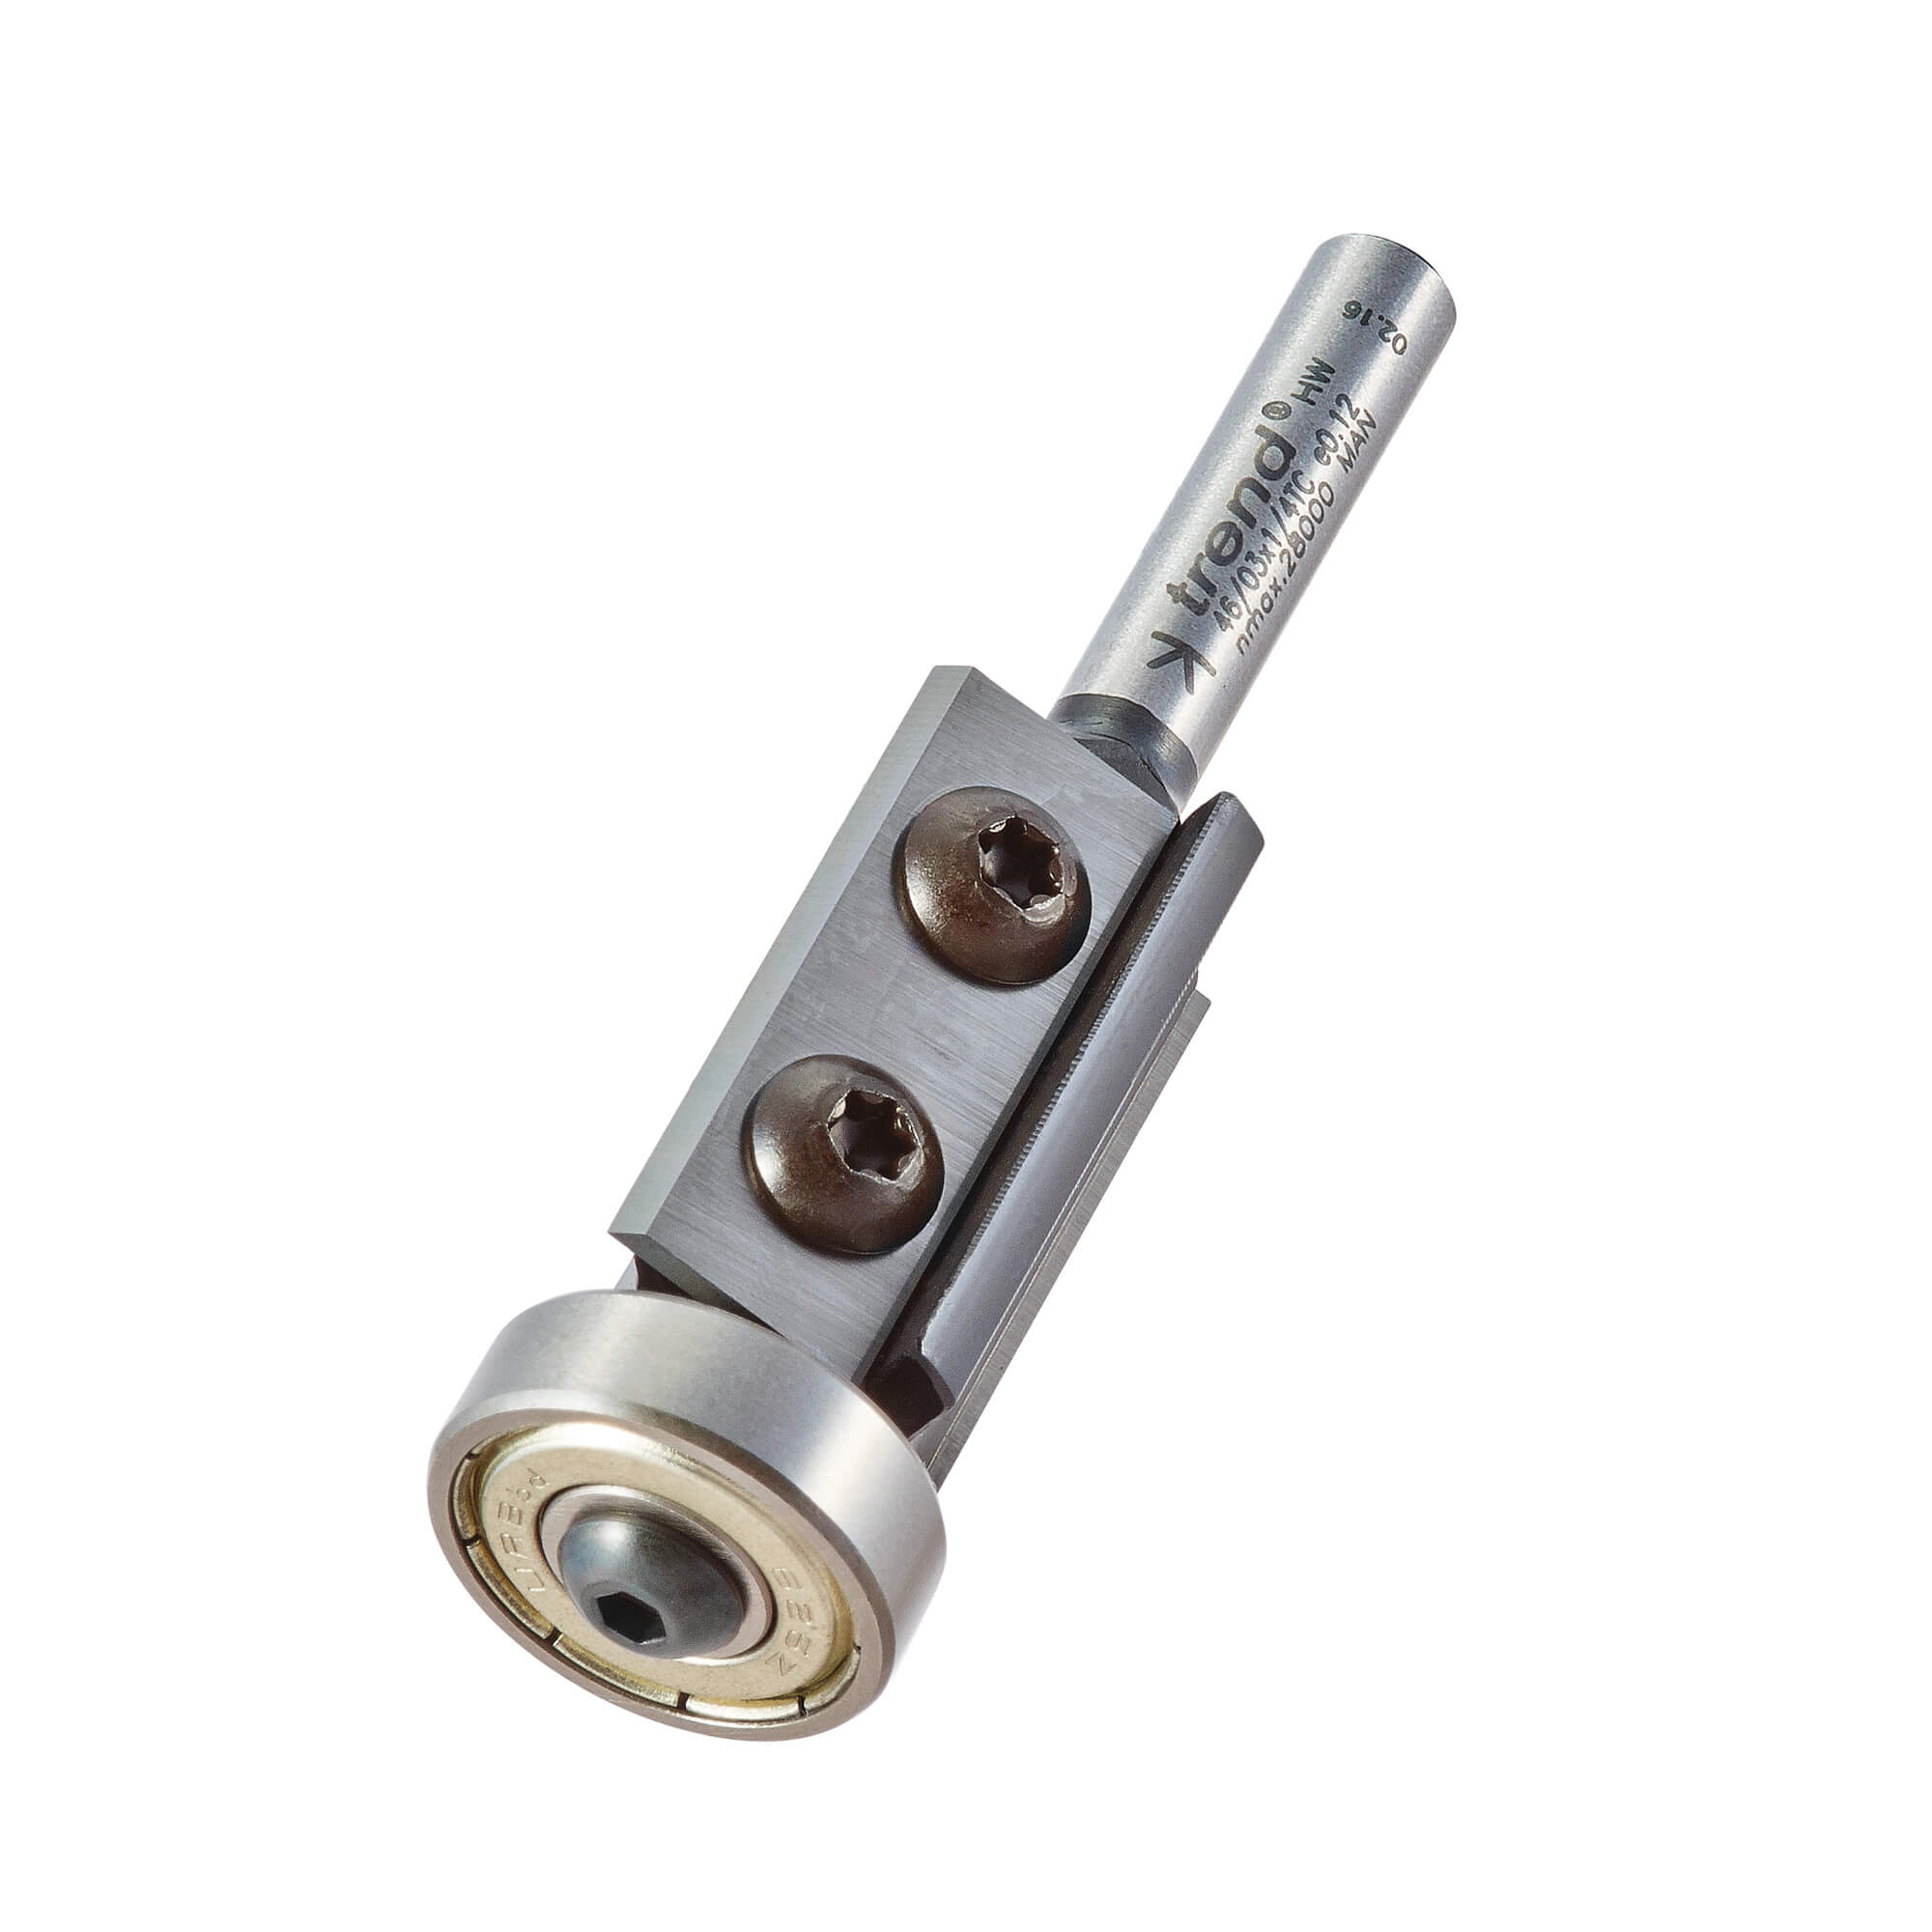 Image of Trend Rotatip Trimmer Bearing Guided Router Cutter 19mm 30mm 1/4"